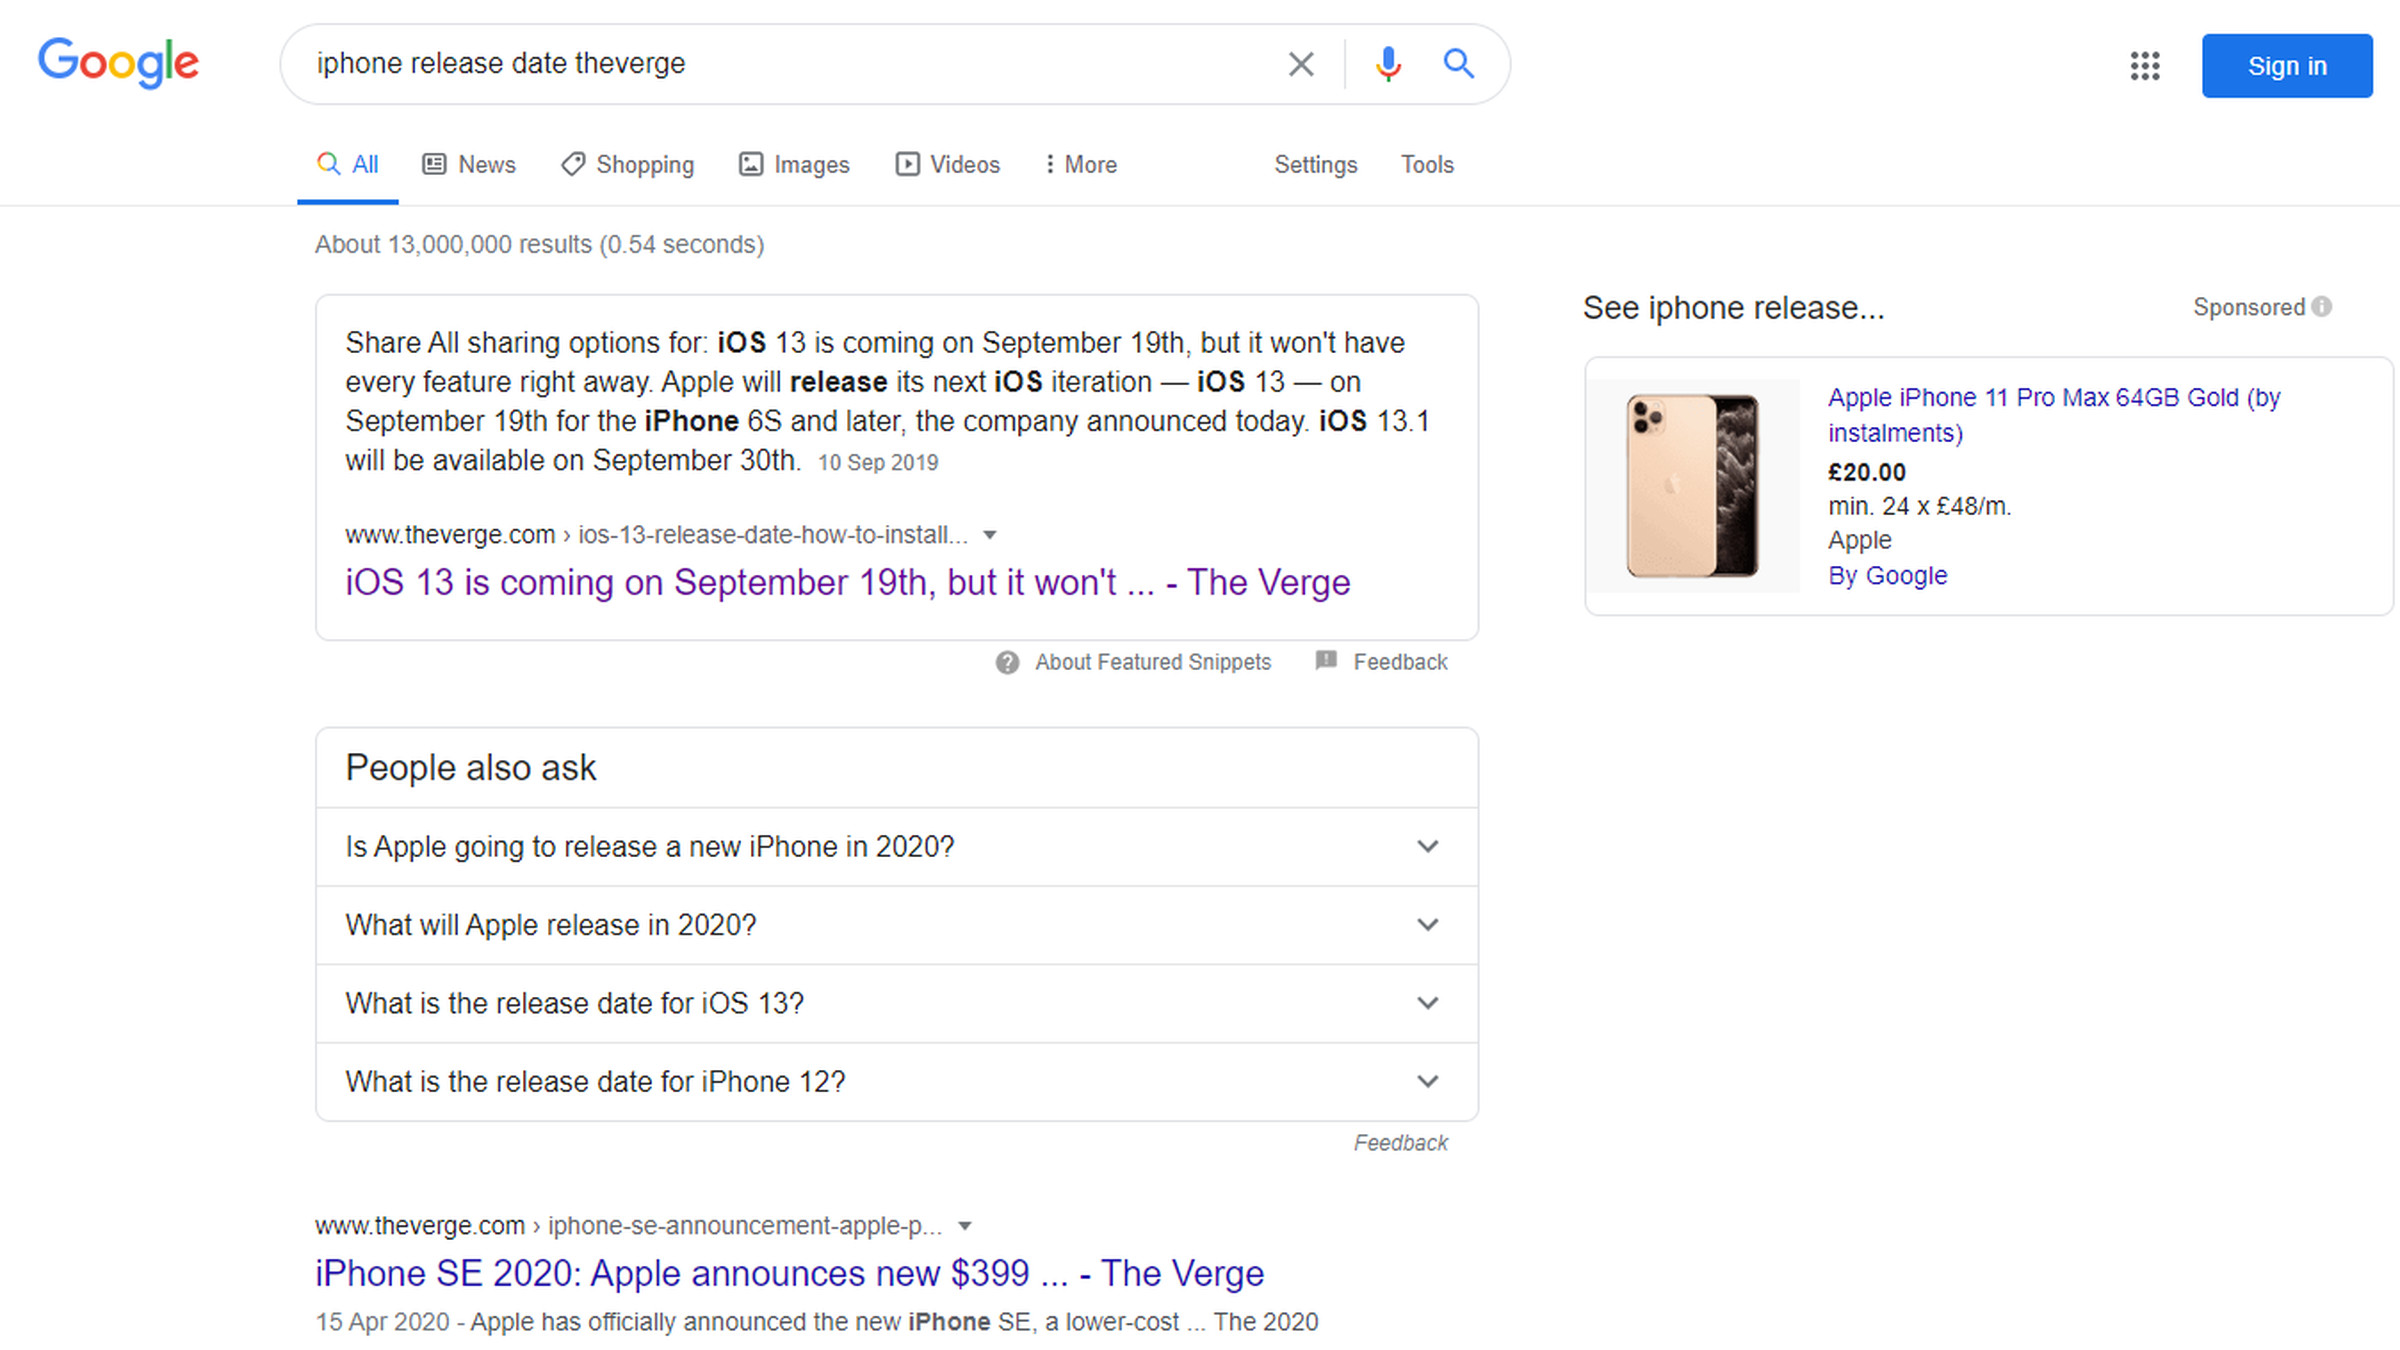 The functionality works on Google’s Featured Snippets, shown here at the top of the search results.